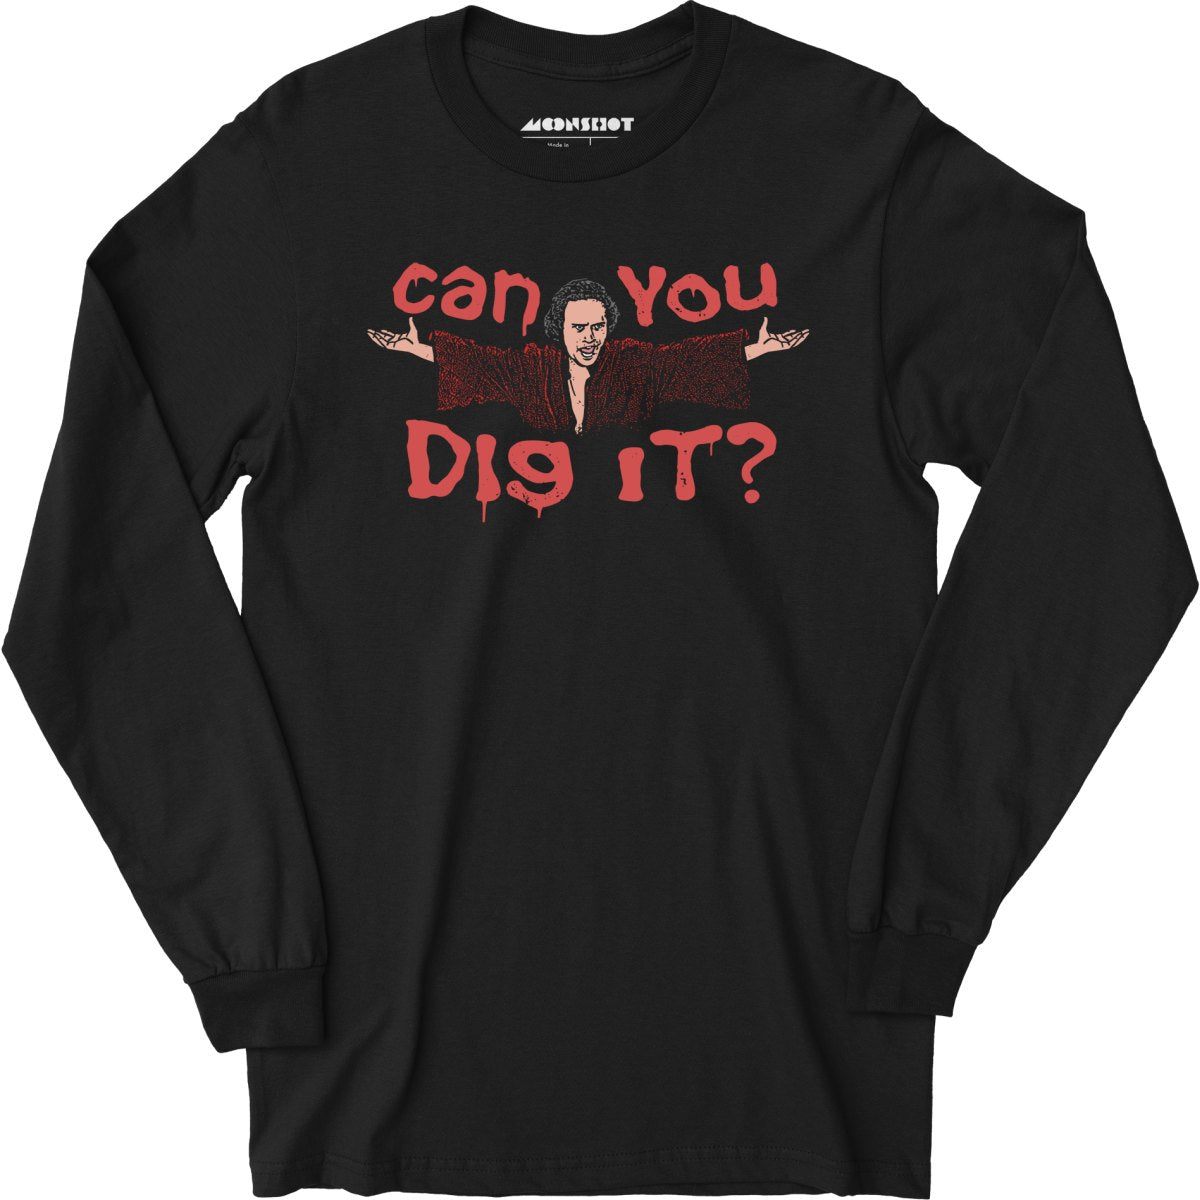 Can You Dig It? - Long Sleeve T-Shirt